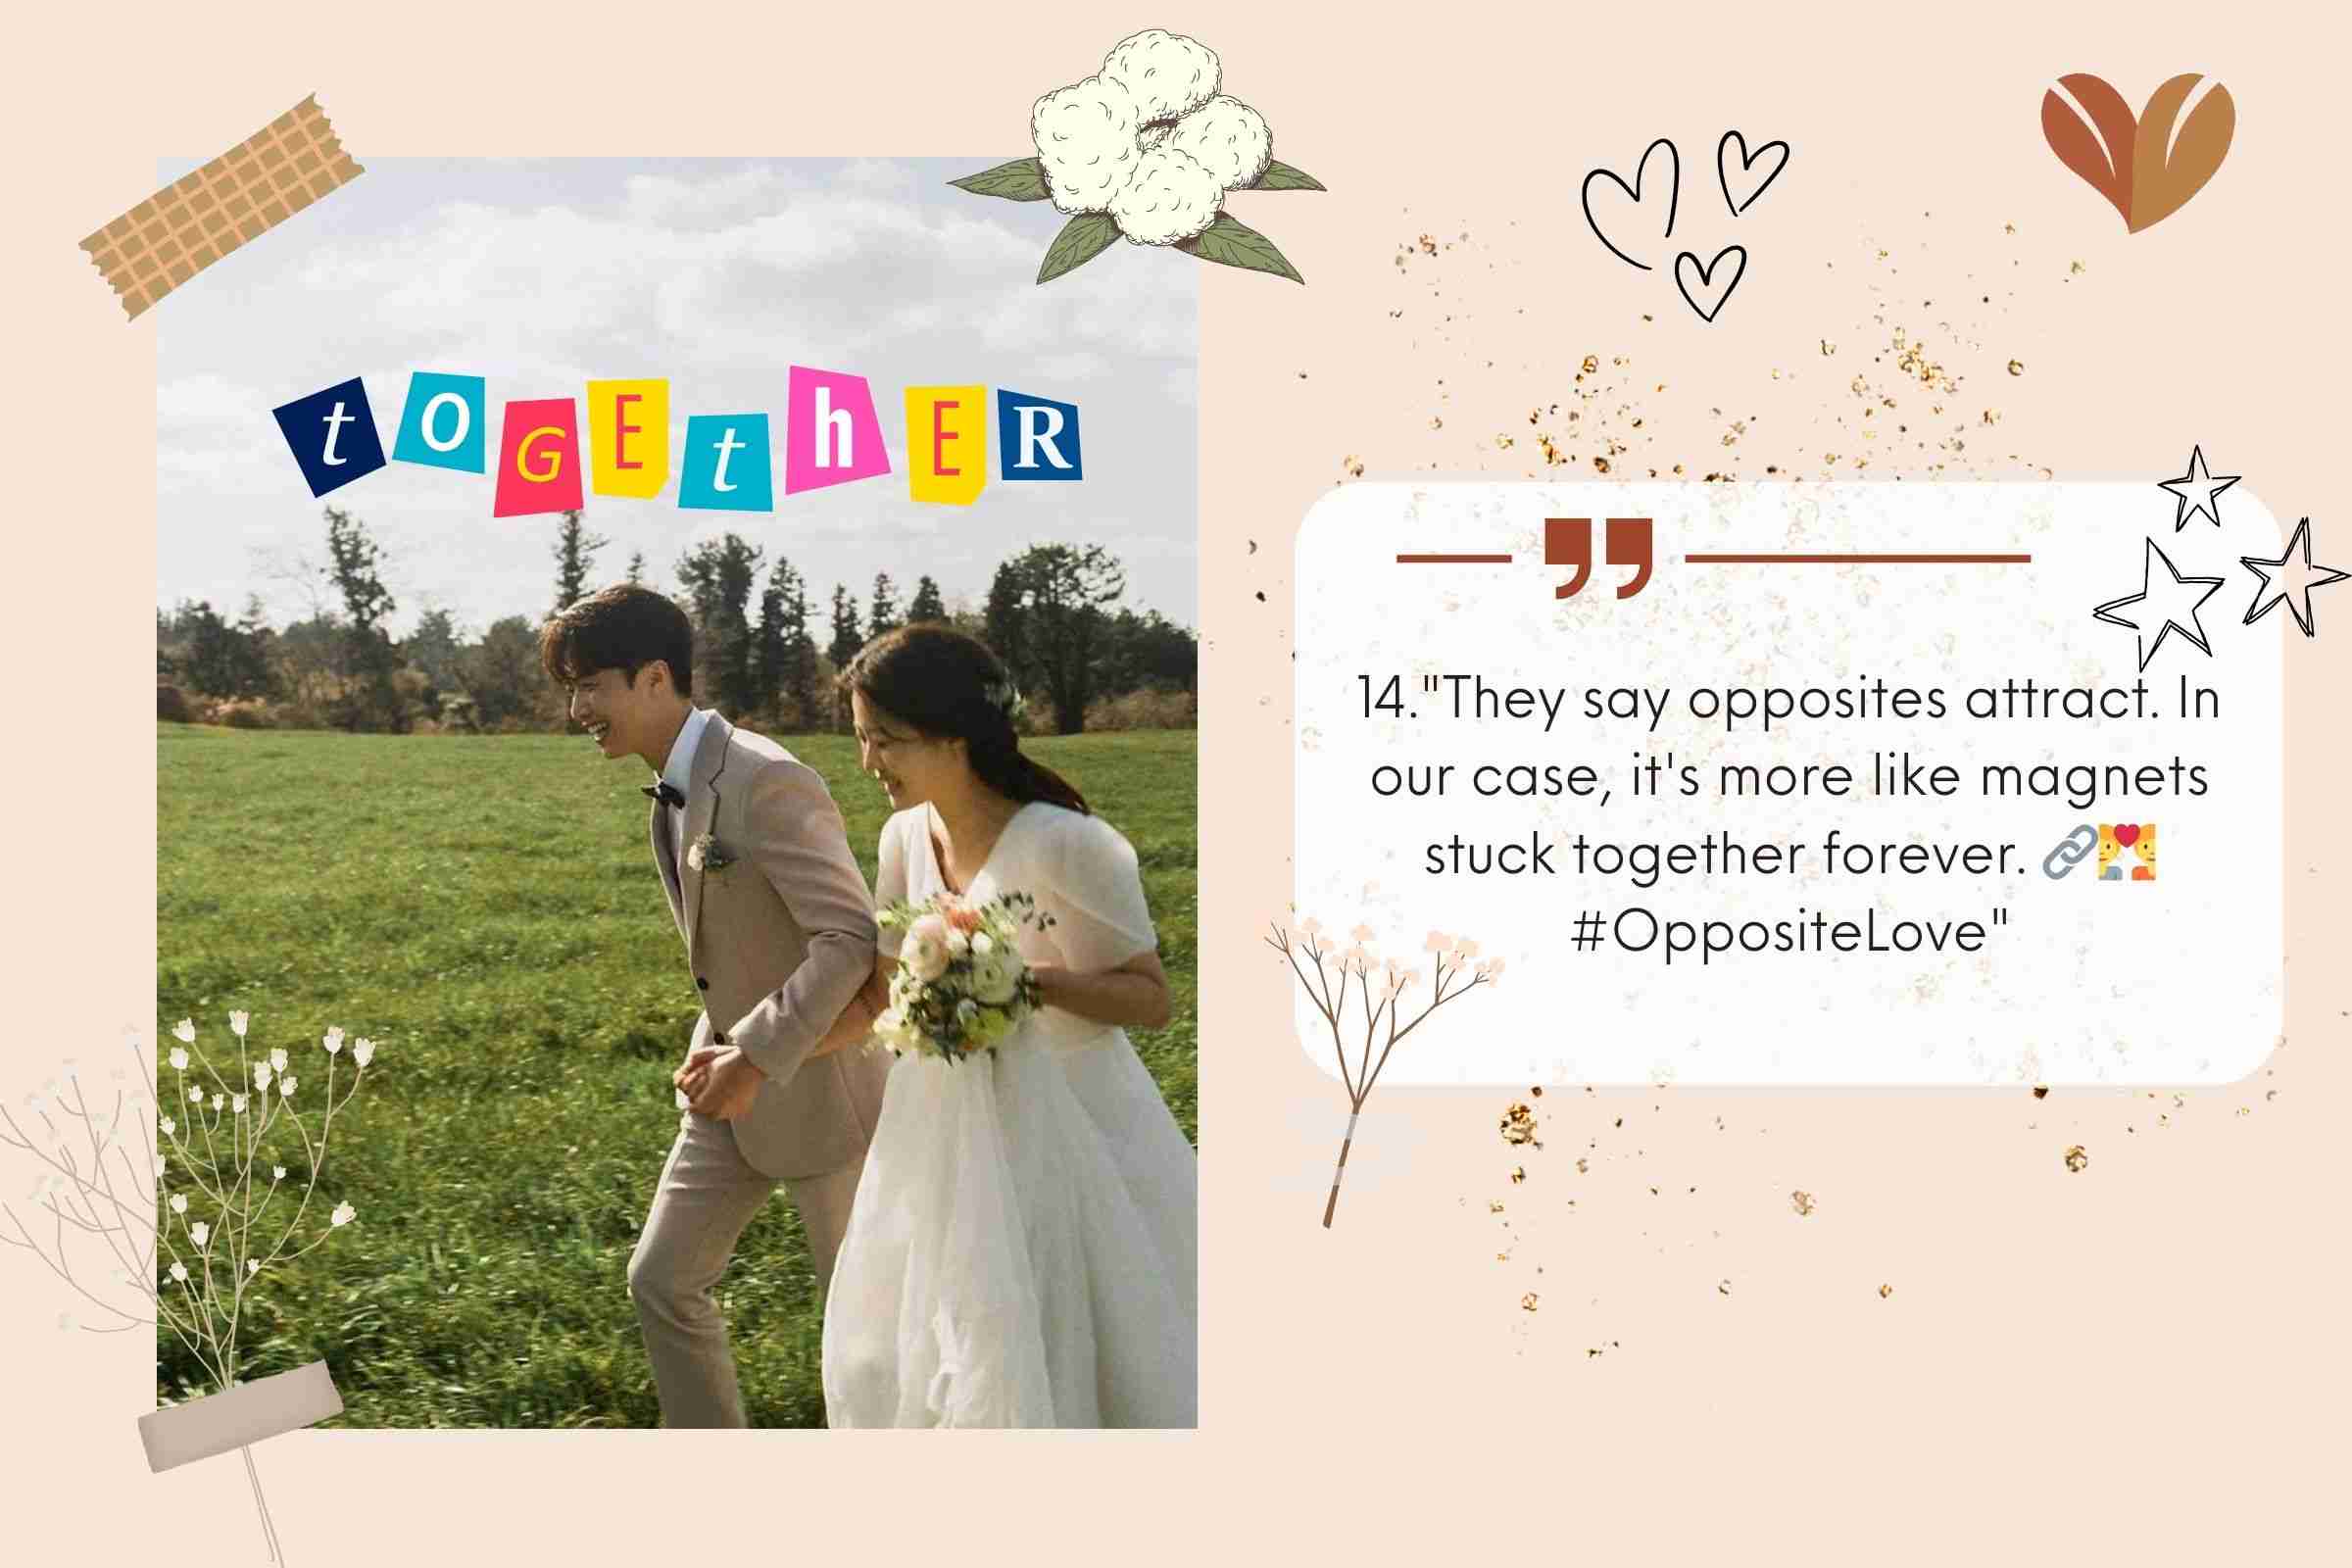 1"They say opposites attract. In our case, it's more like magnets stuck together forever. 🔗💑 #OppositeLove"